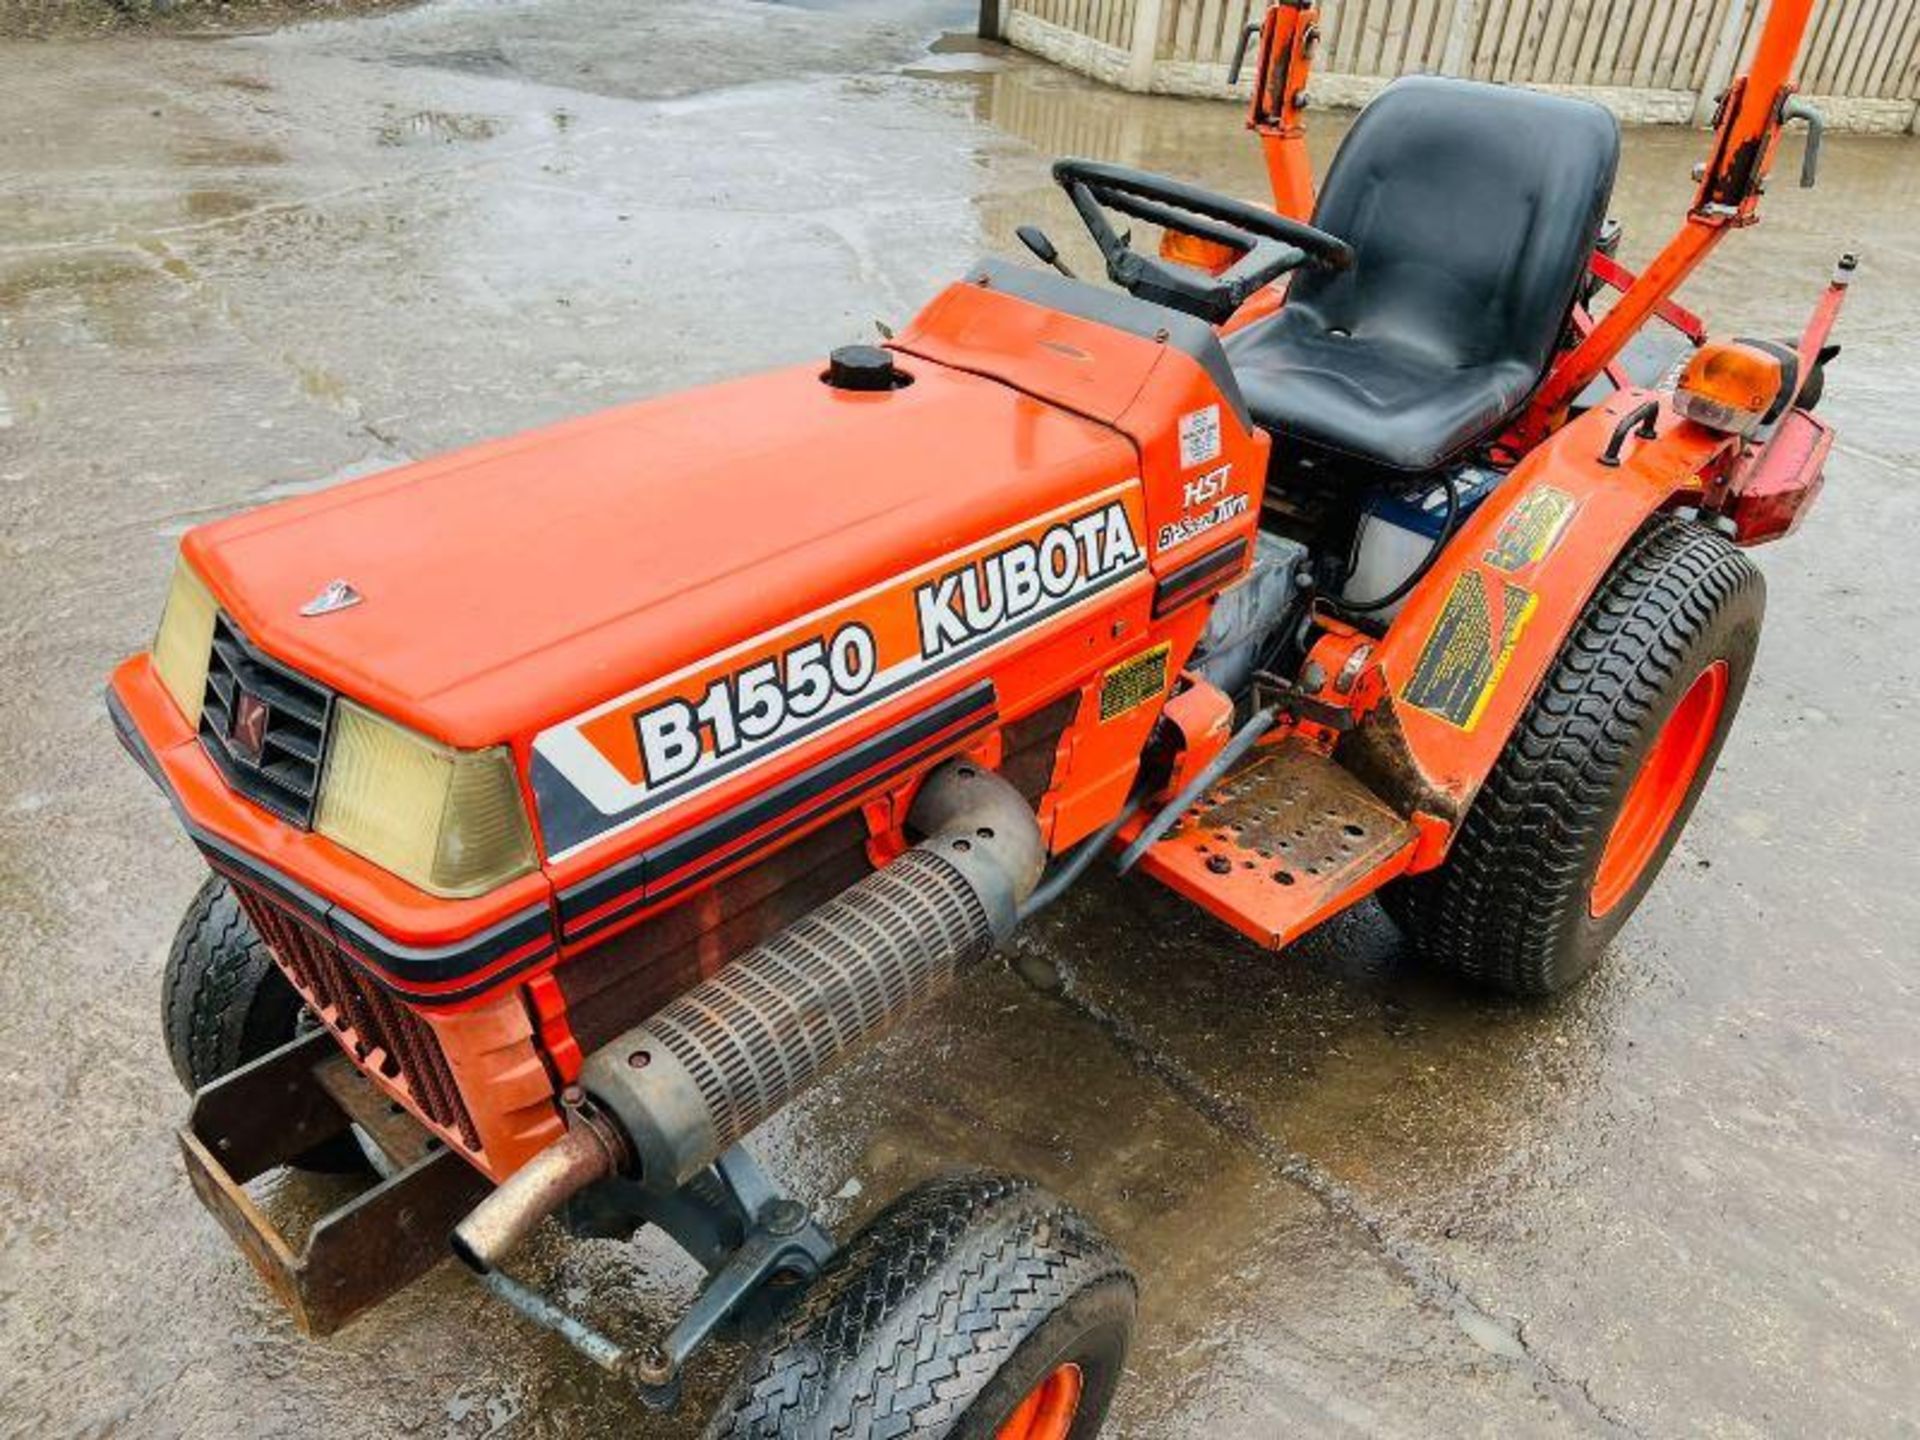 KUBOTA B1550 COMPACT TRACTOR C/W ROLE BAR AND TOPPER - Image 2 of 12